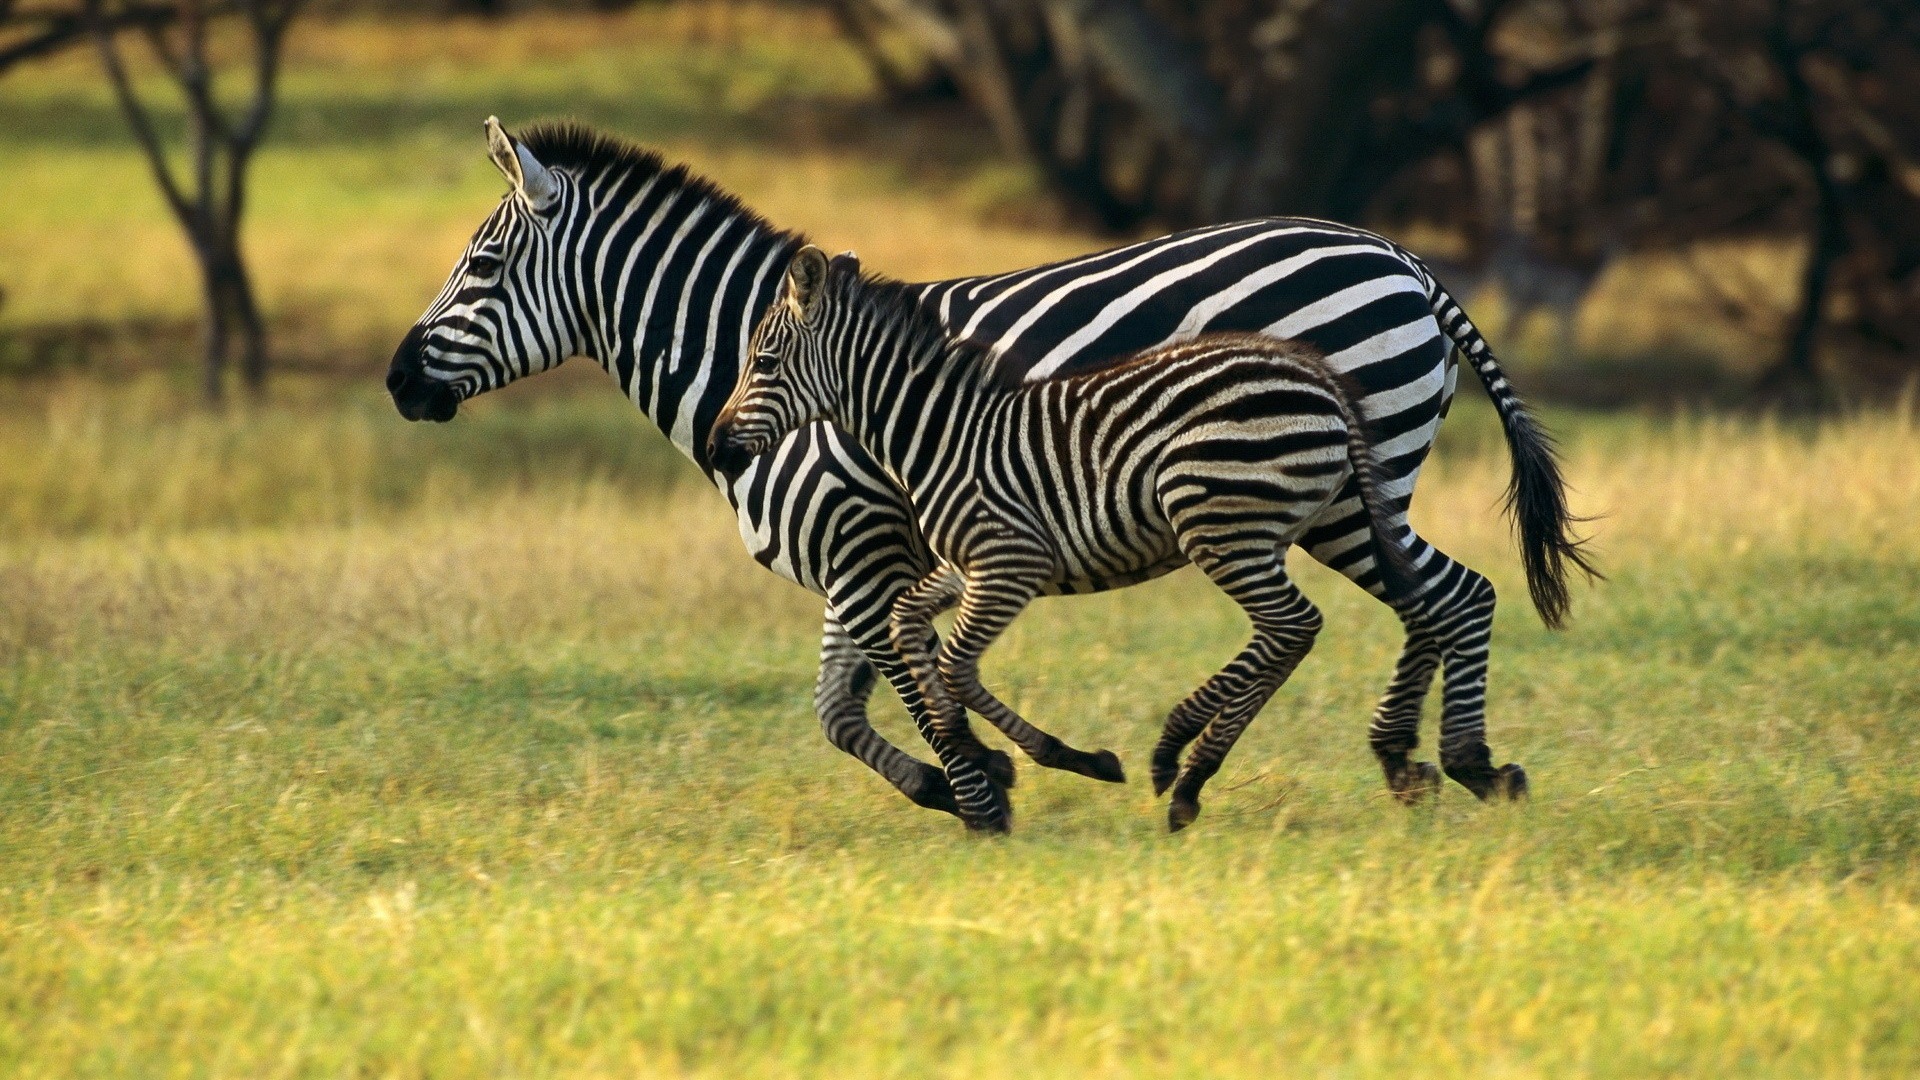 Black and white striped animal, zebra HD wallpapers #6 - 1920x1080